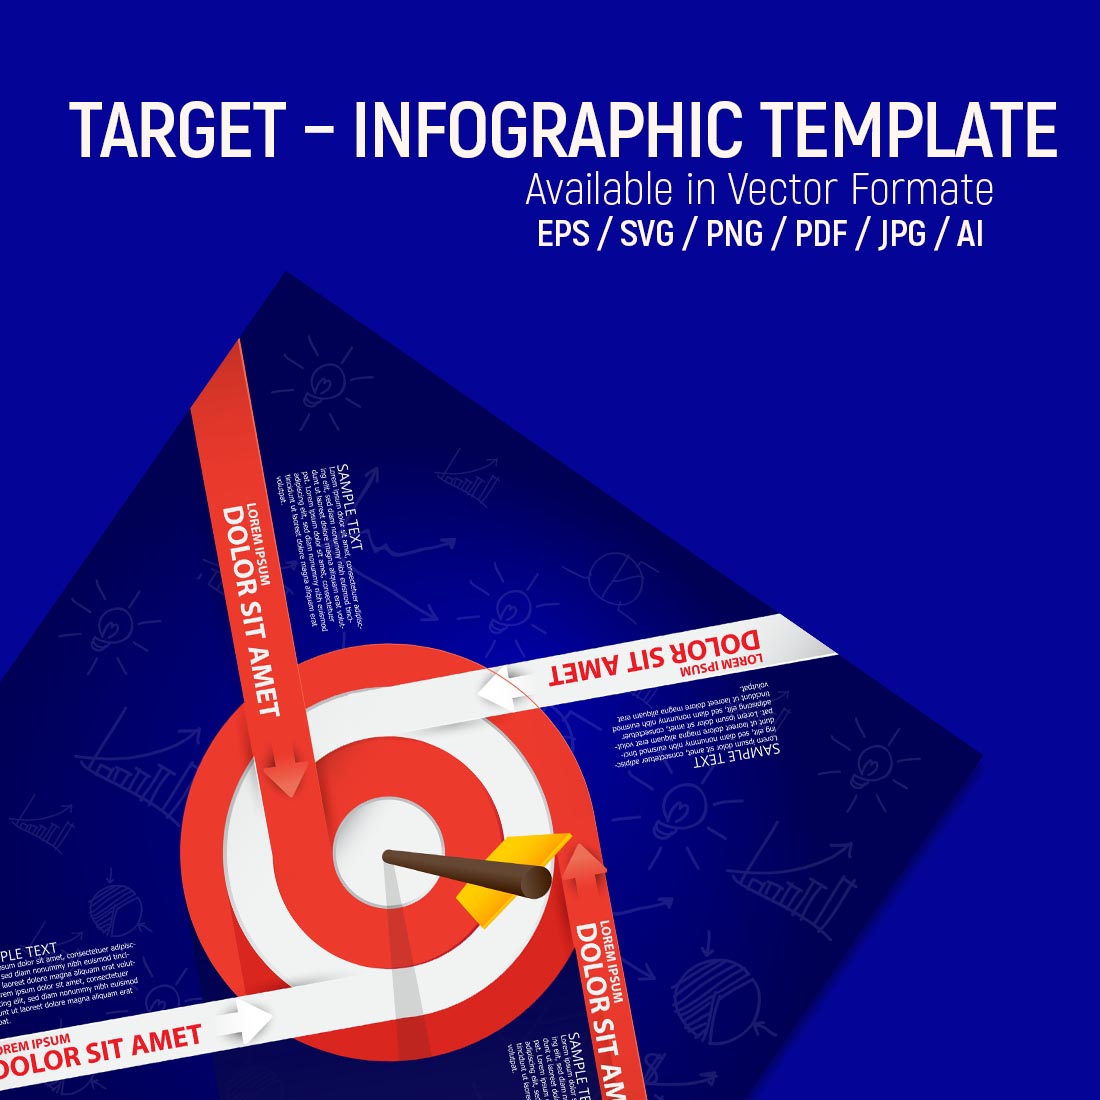 Target – Infographic Design Template cover image.